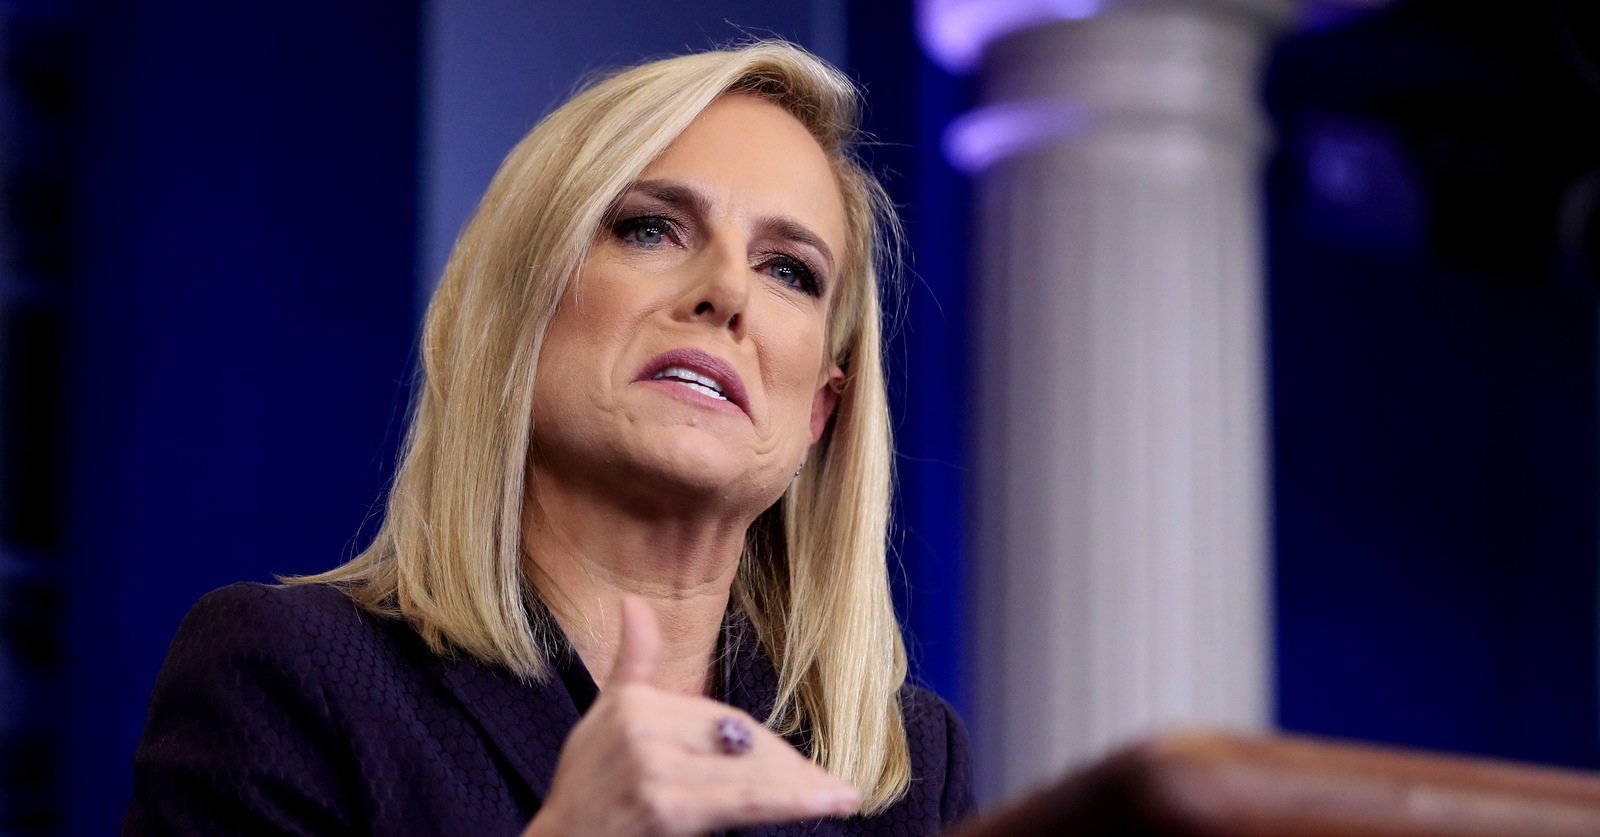 Homeland Security Secretary Kirstjen Nielsen, talks to reporters during the daily press briefing in the Brady press briefing room at the White House, in Washington, Wednesday, April 4, 2018. (AP Photo/Manuel Balce Ceneta)